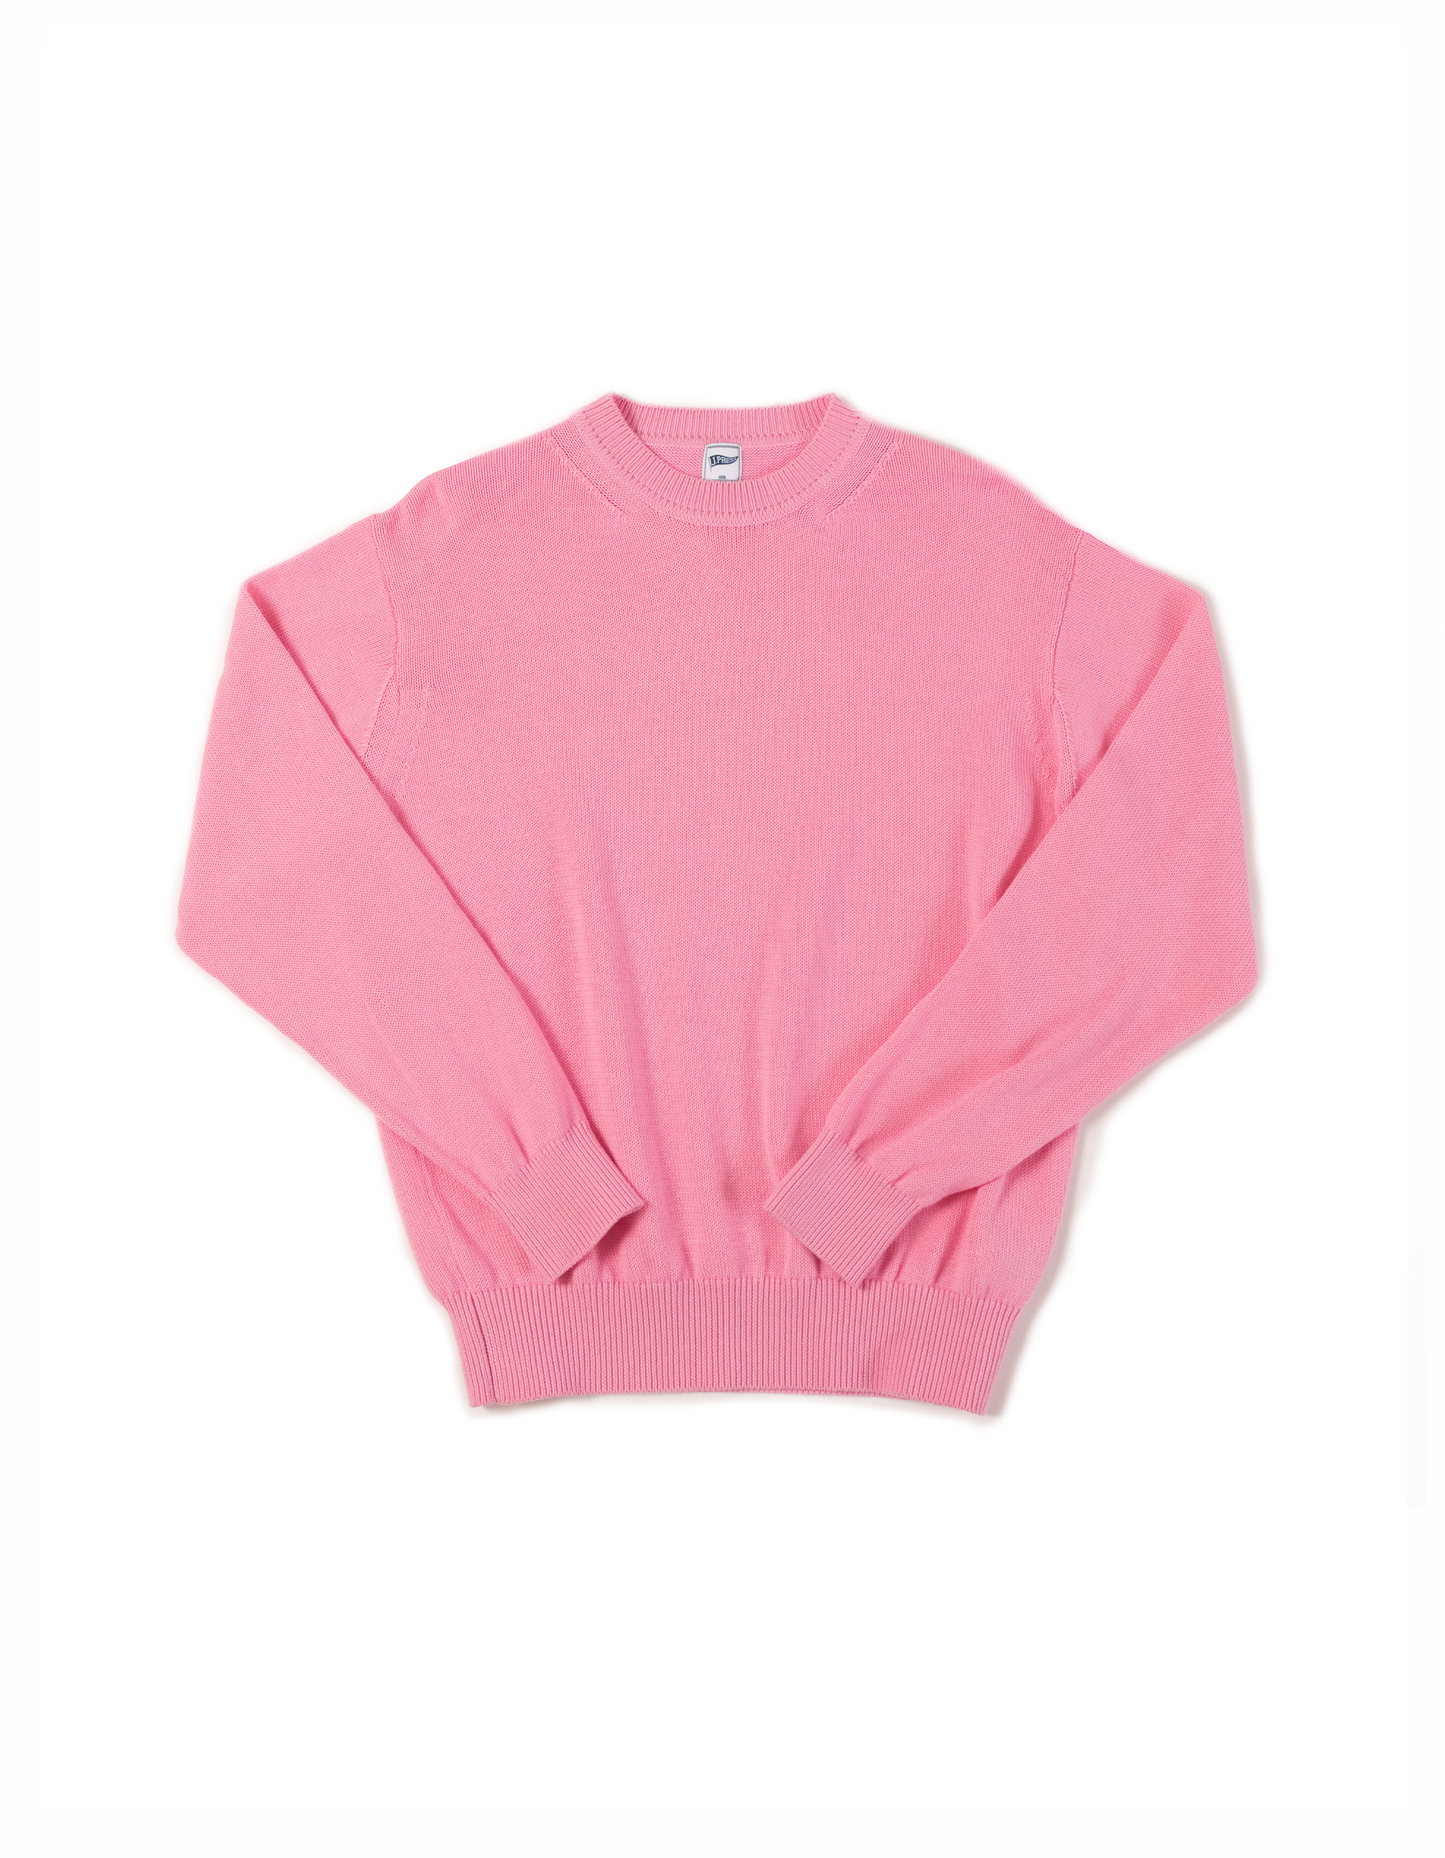 SOLID COTTON CREW NECK SWEATER - PINK